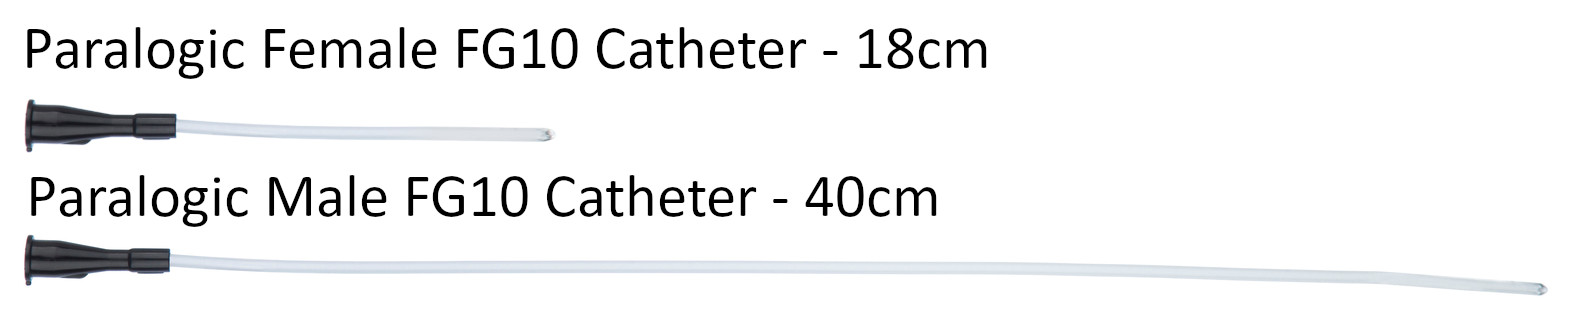 Comparison between Male and Female intermittent catheter lengths